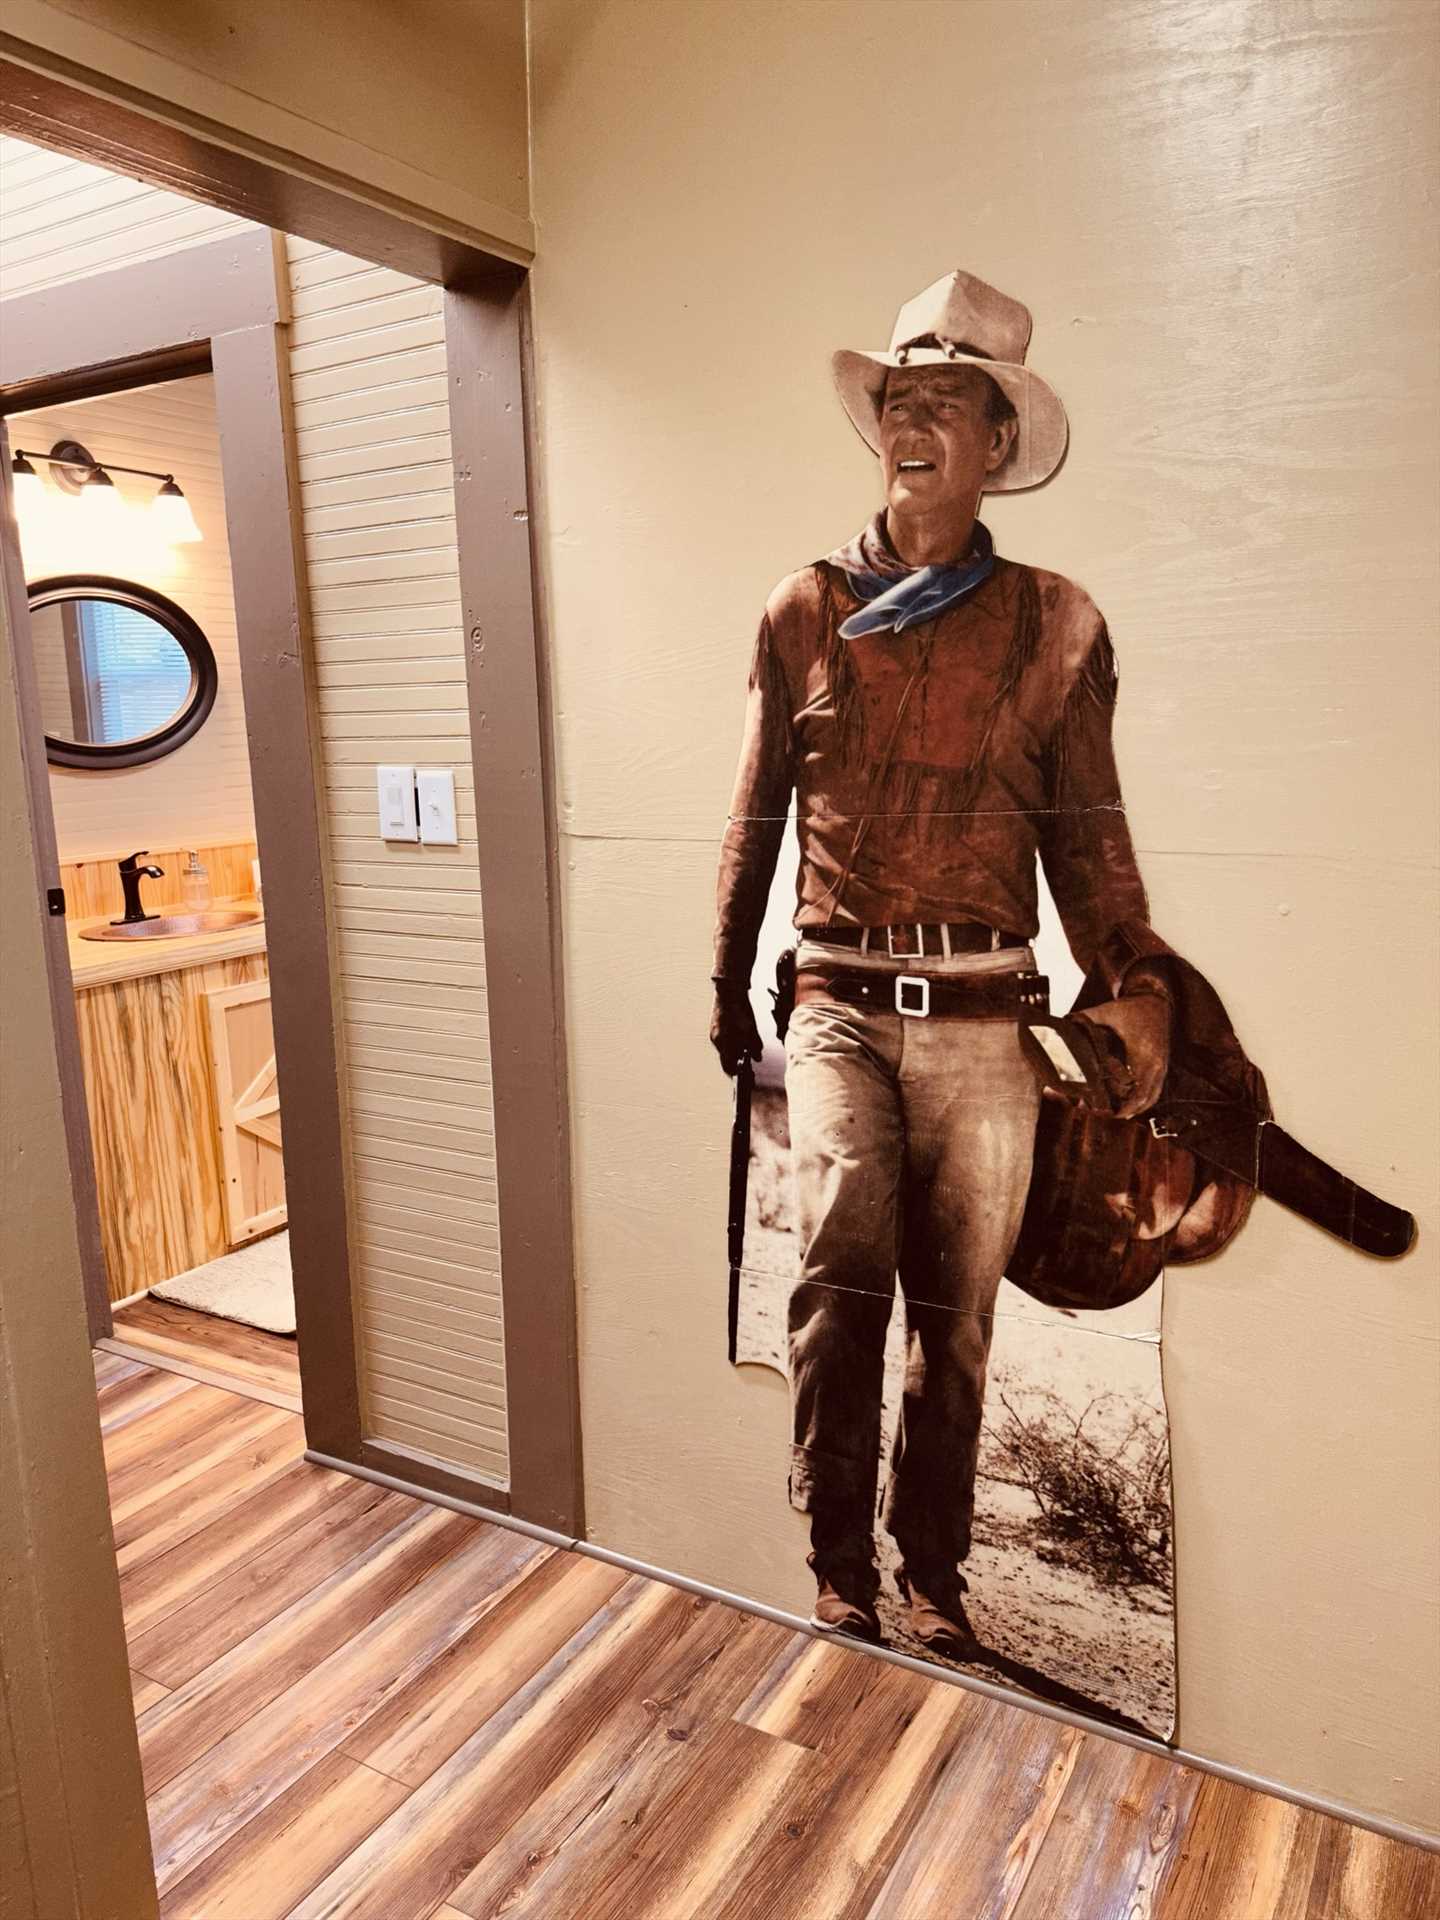                                                 Don't let this hombre catch you by surprise...it's just the Duke saying howdy!